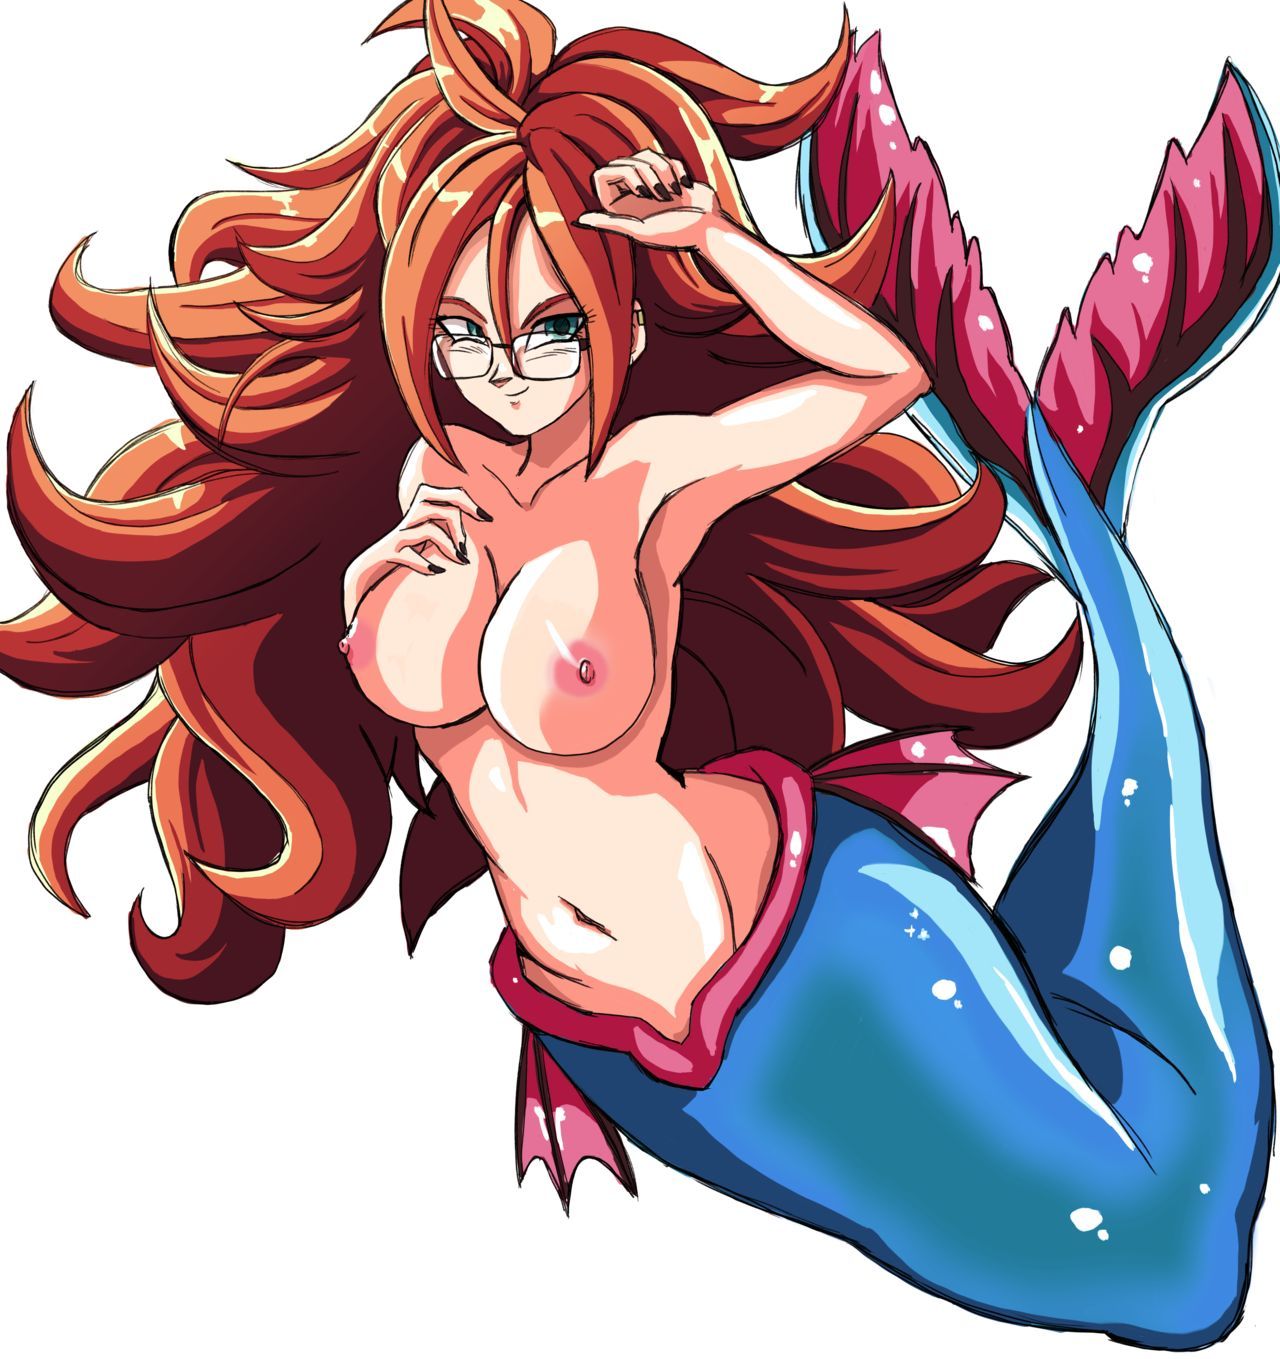 My Favorite Android 21 Pics 14